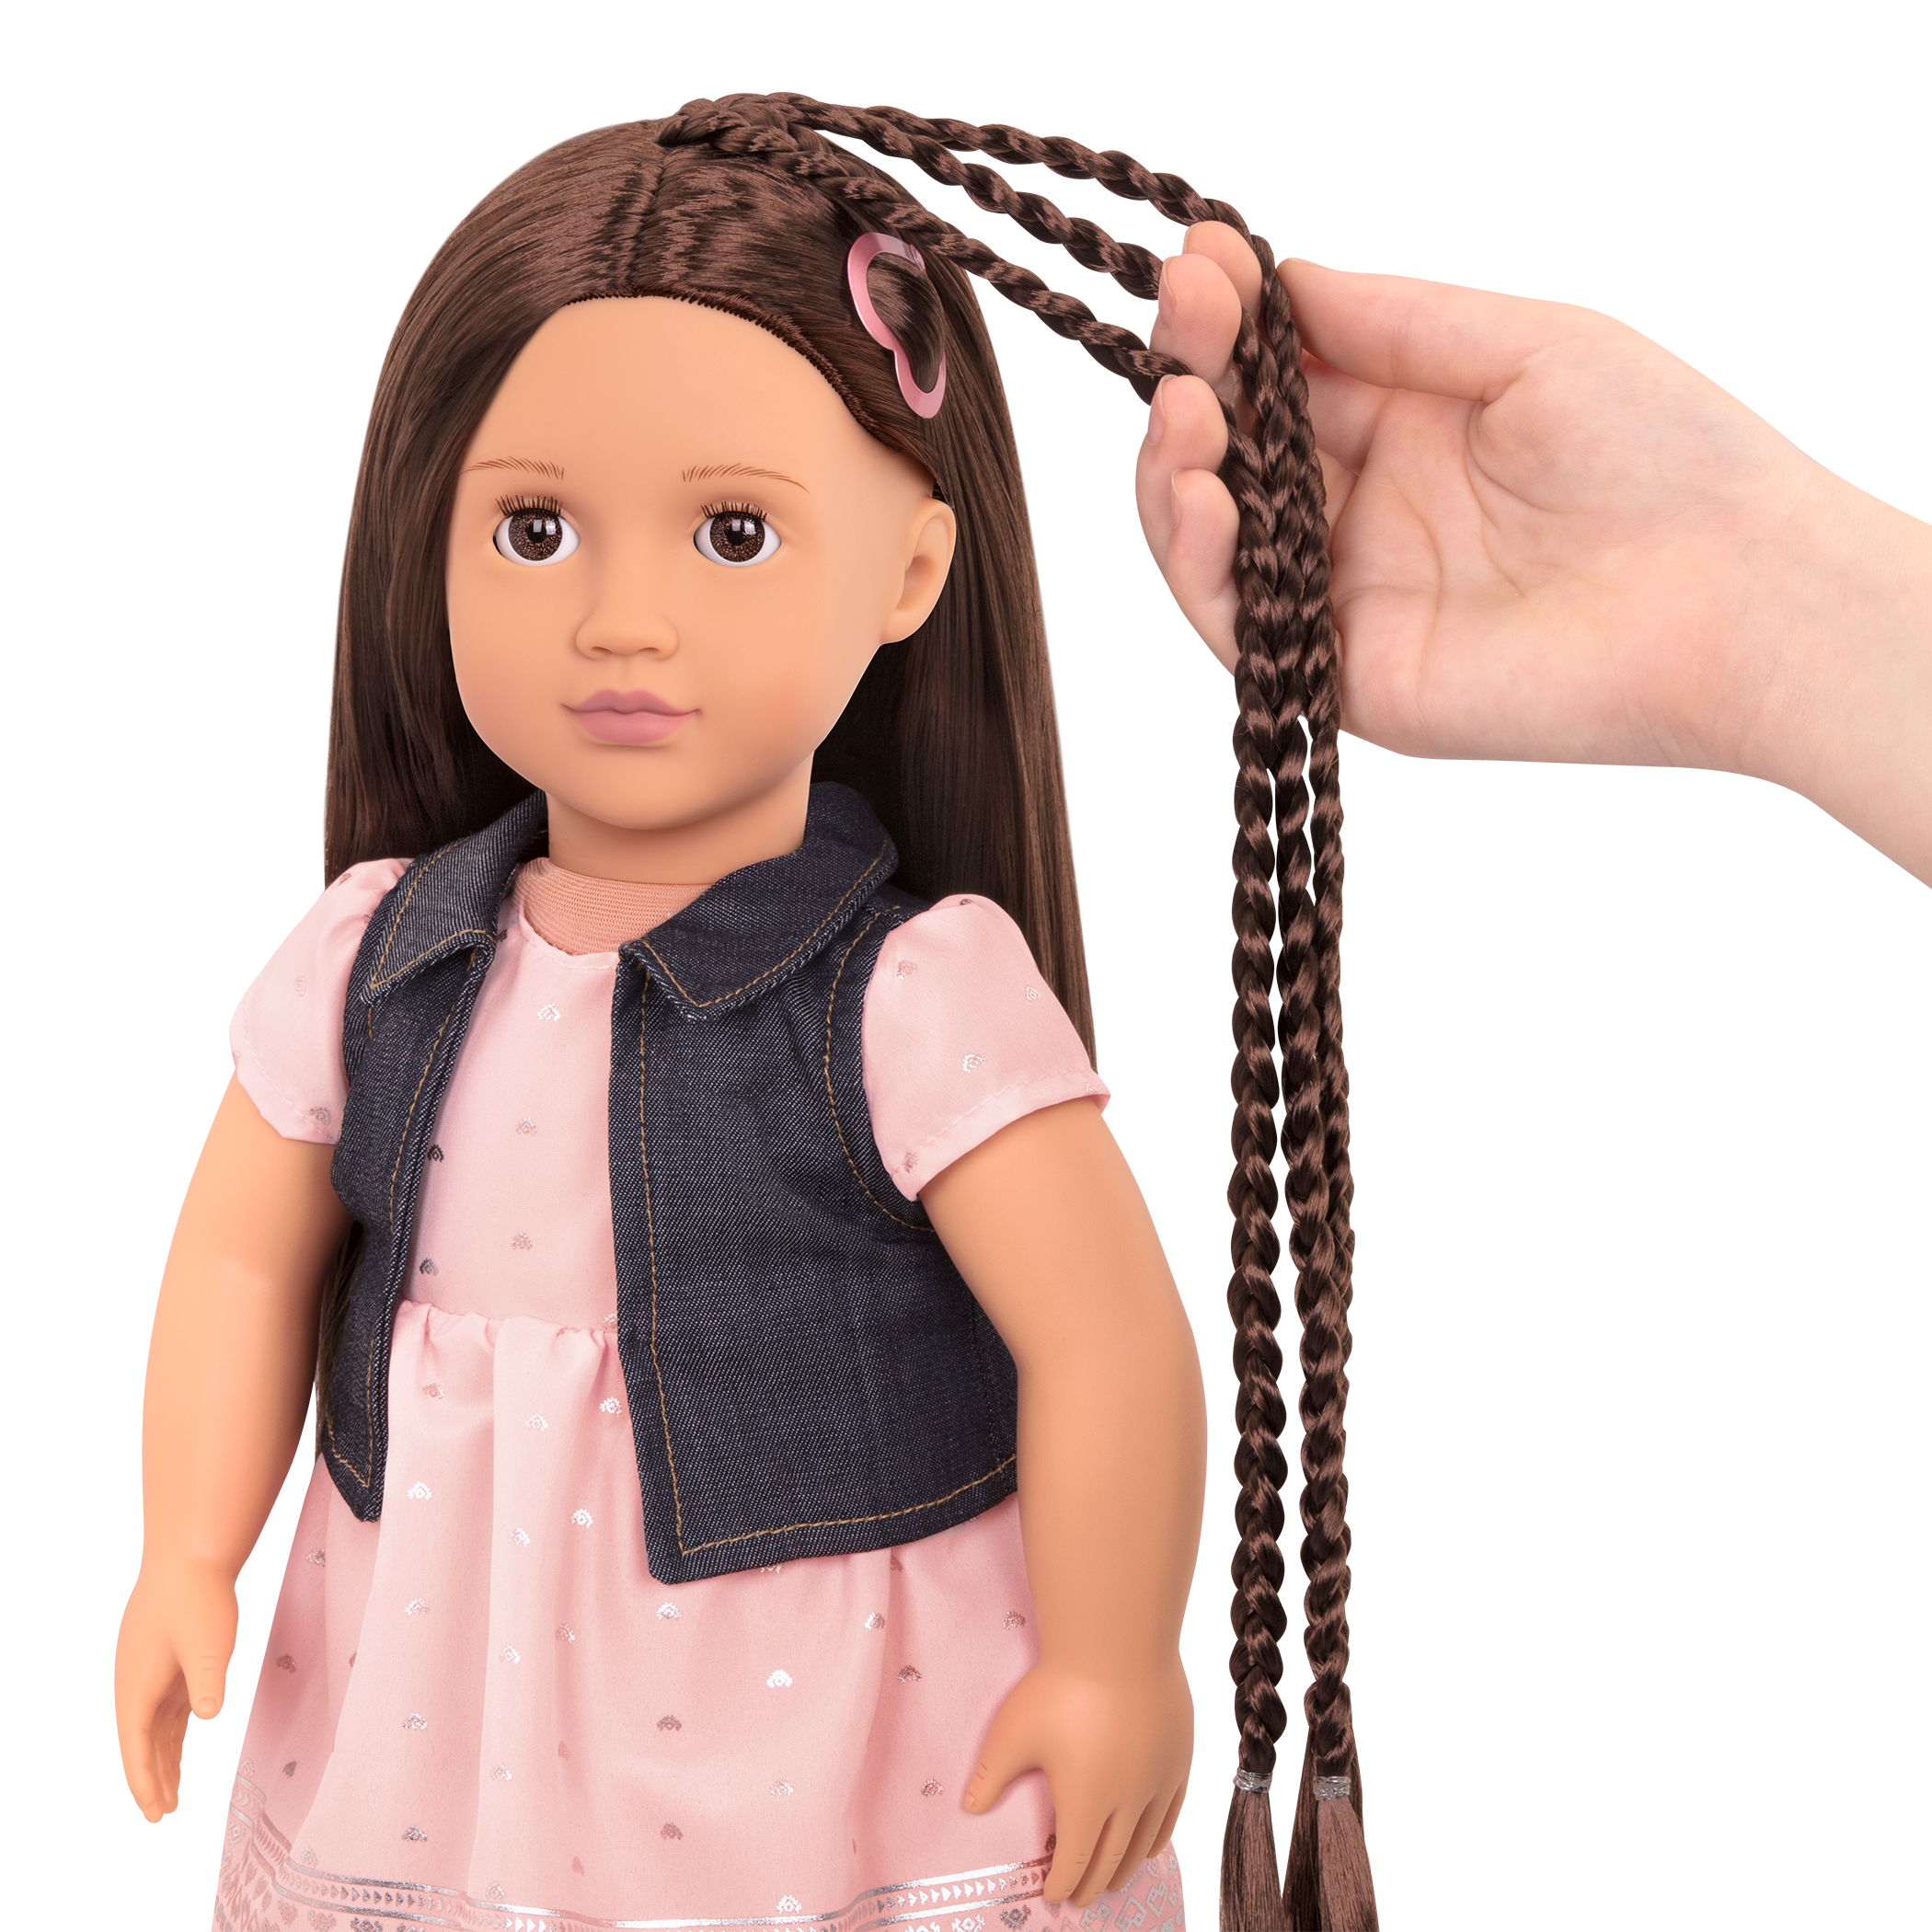 18-inch doll with brown hair, brown eyes and extensions